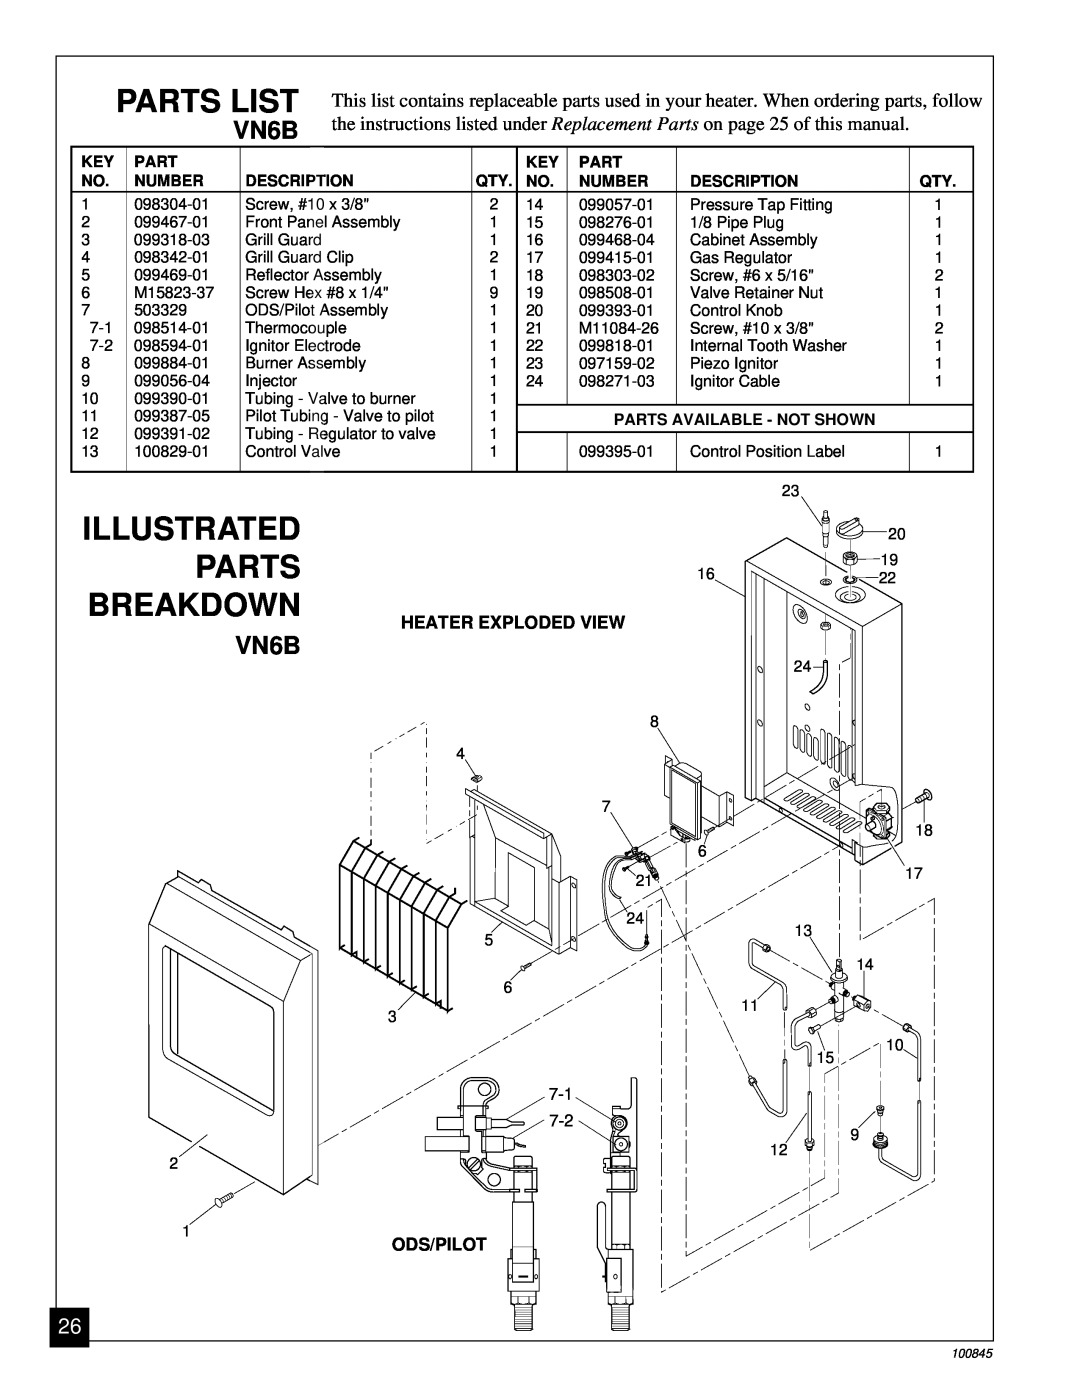 Vanguard Heating VN12A Parts List, Illustrated Parts Breakdown, VN6B, Number, Description, Parts Available - Not Shown 